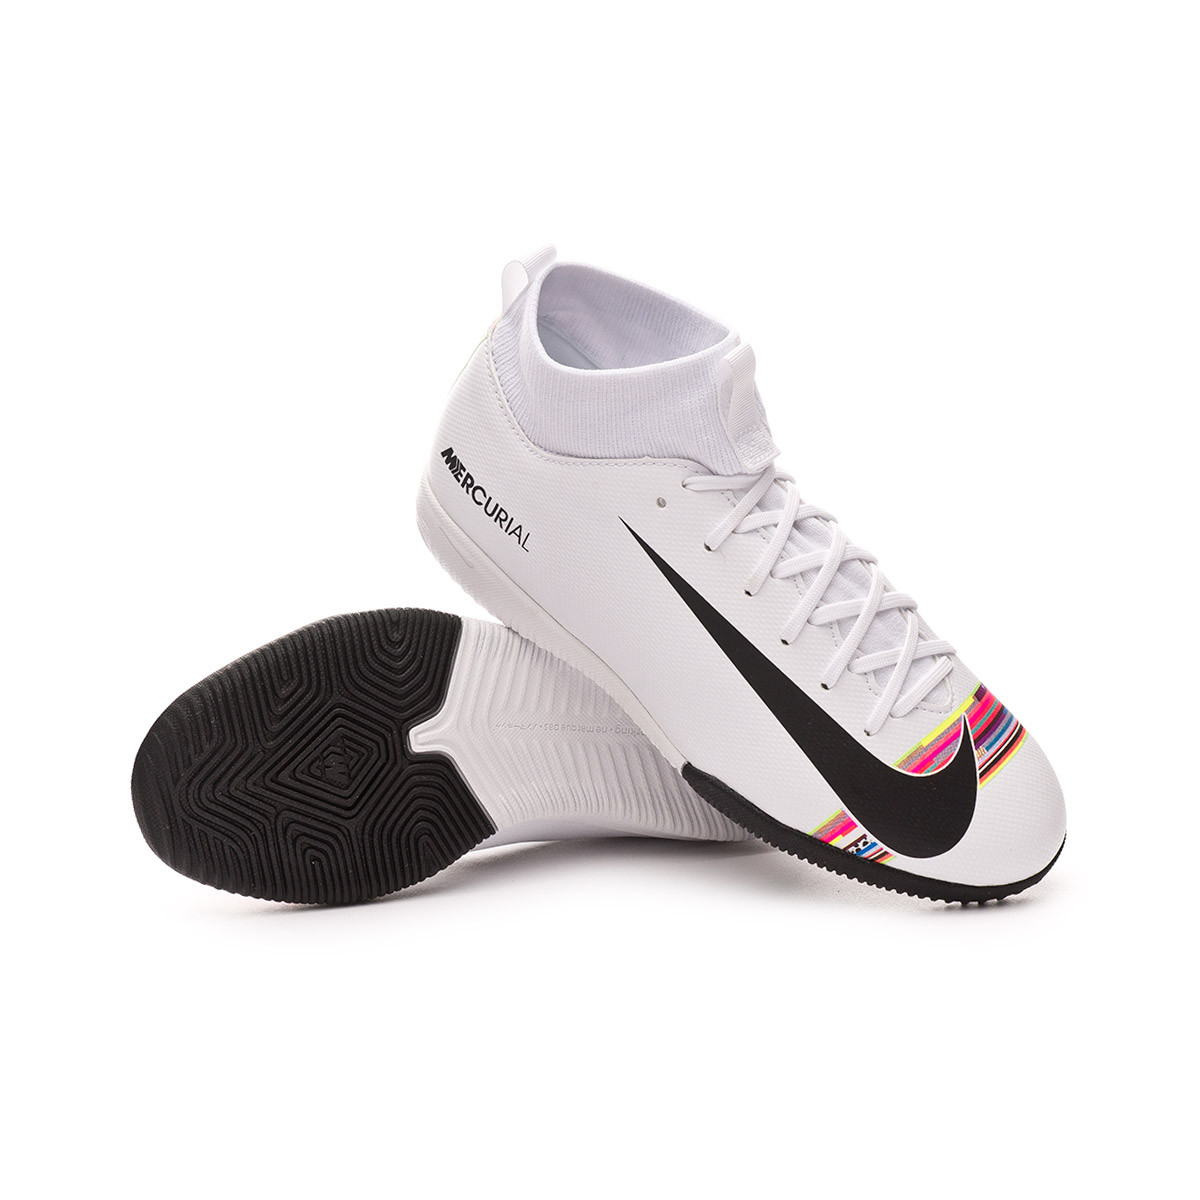 nike superflyx 6 academy cr7 indoor soccer shoes